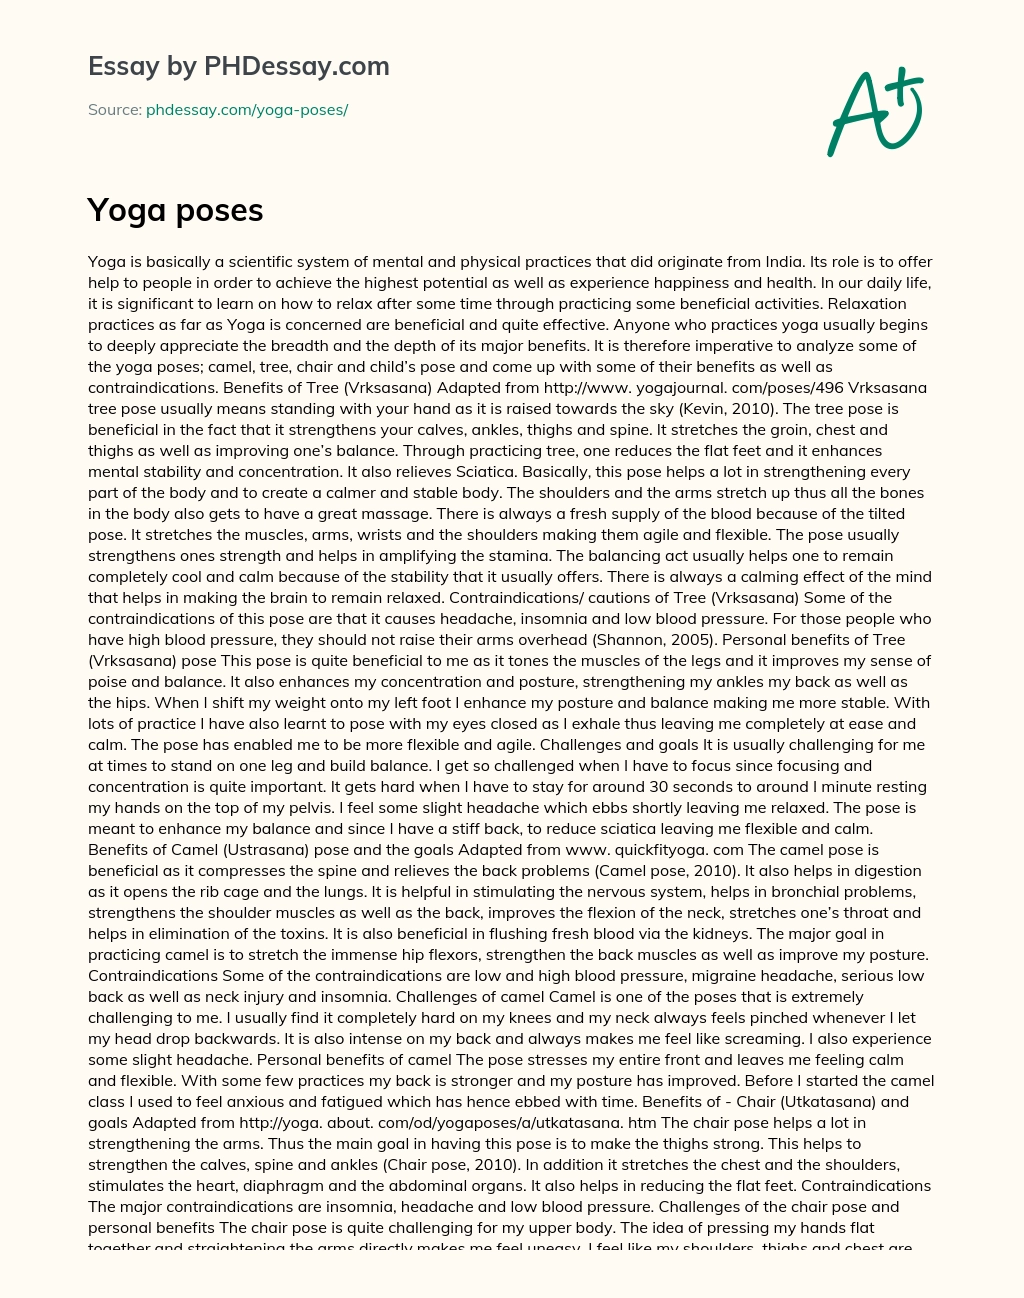 The Benefits of Tree Pose in Yoga essay